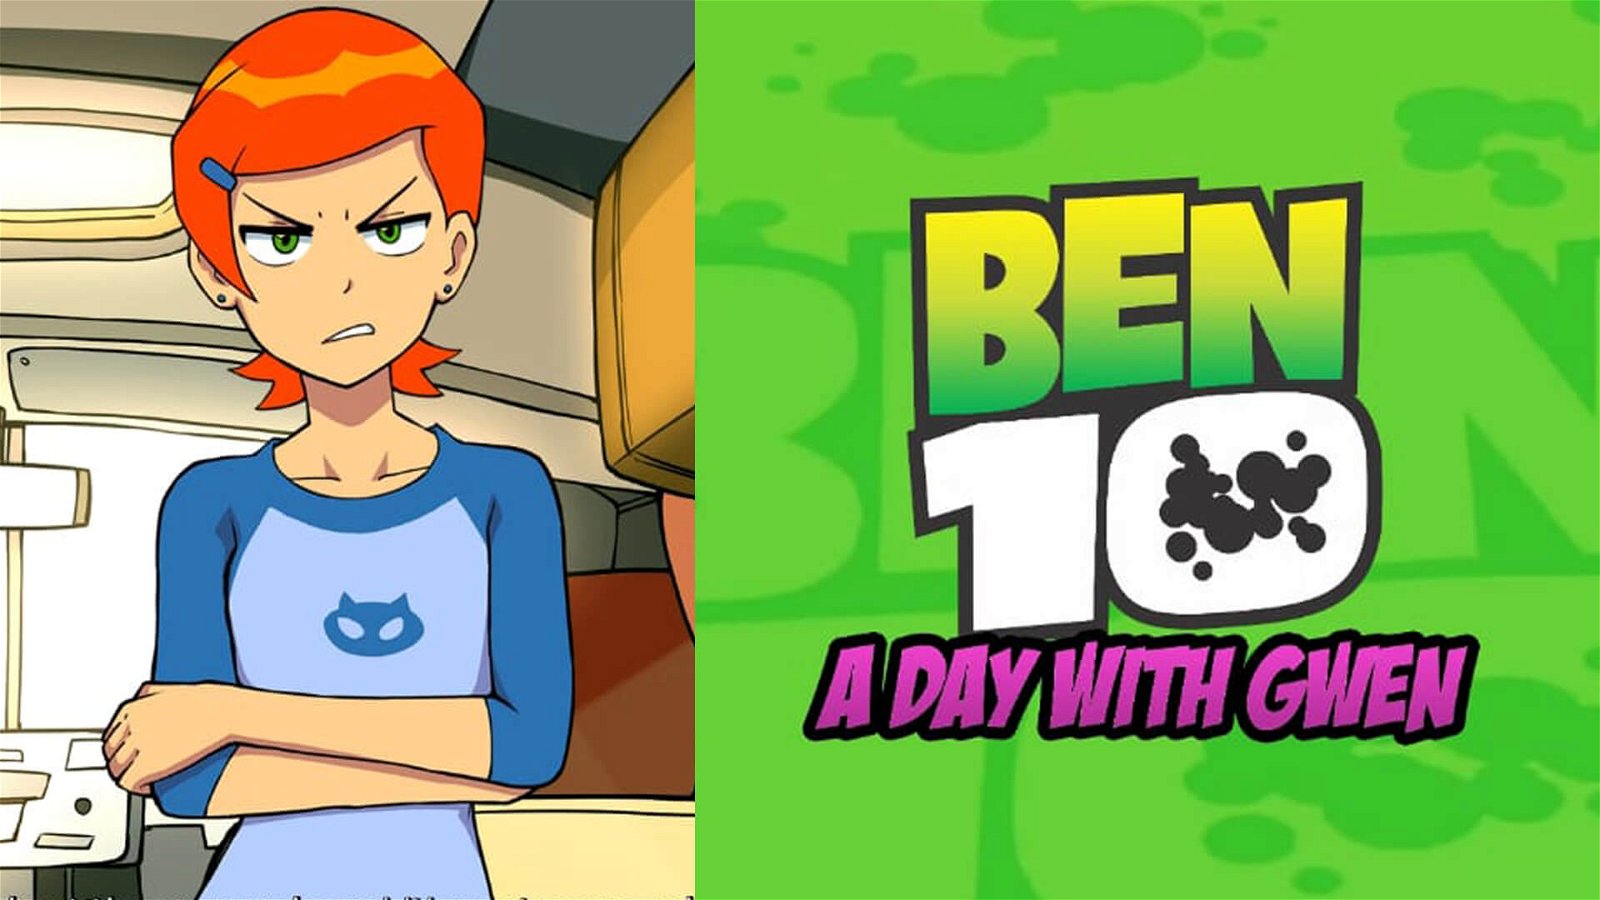 Ben 10: a day with gwen